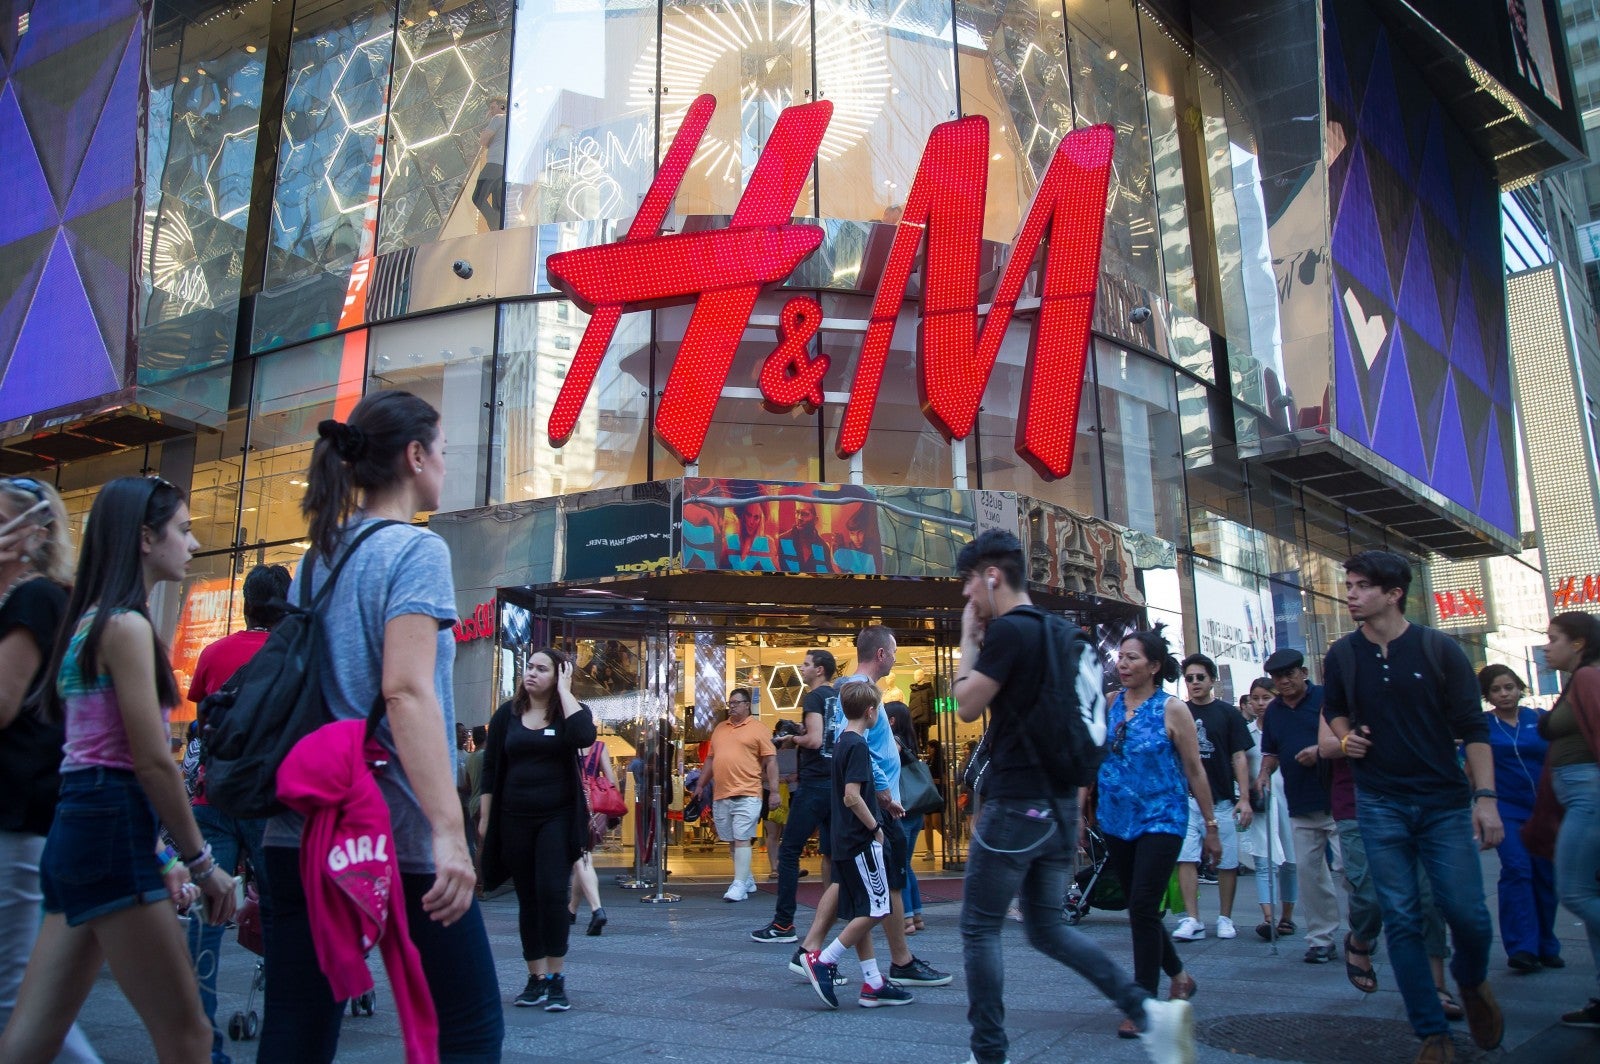 Girl Upset Guy Wore Uniqlo and H&M on First Date Because She Says They Are "Cheap Brands" - WORLD OF BUZZ 2